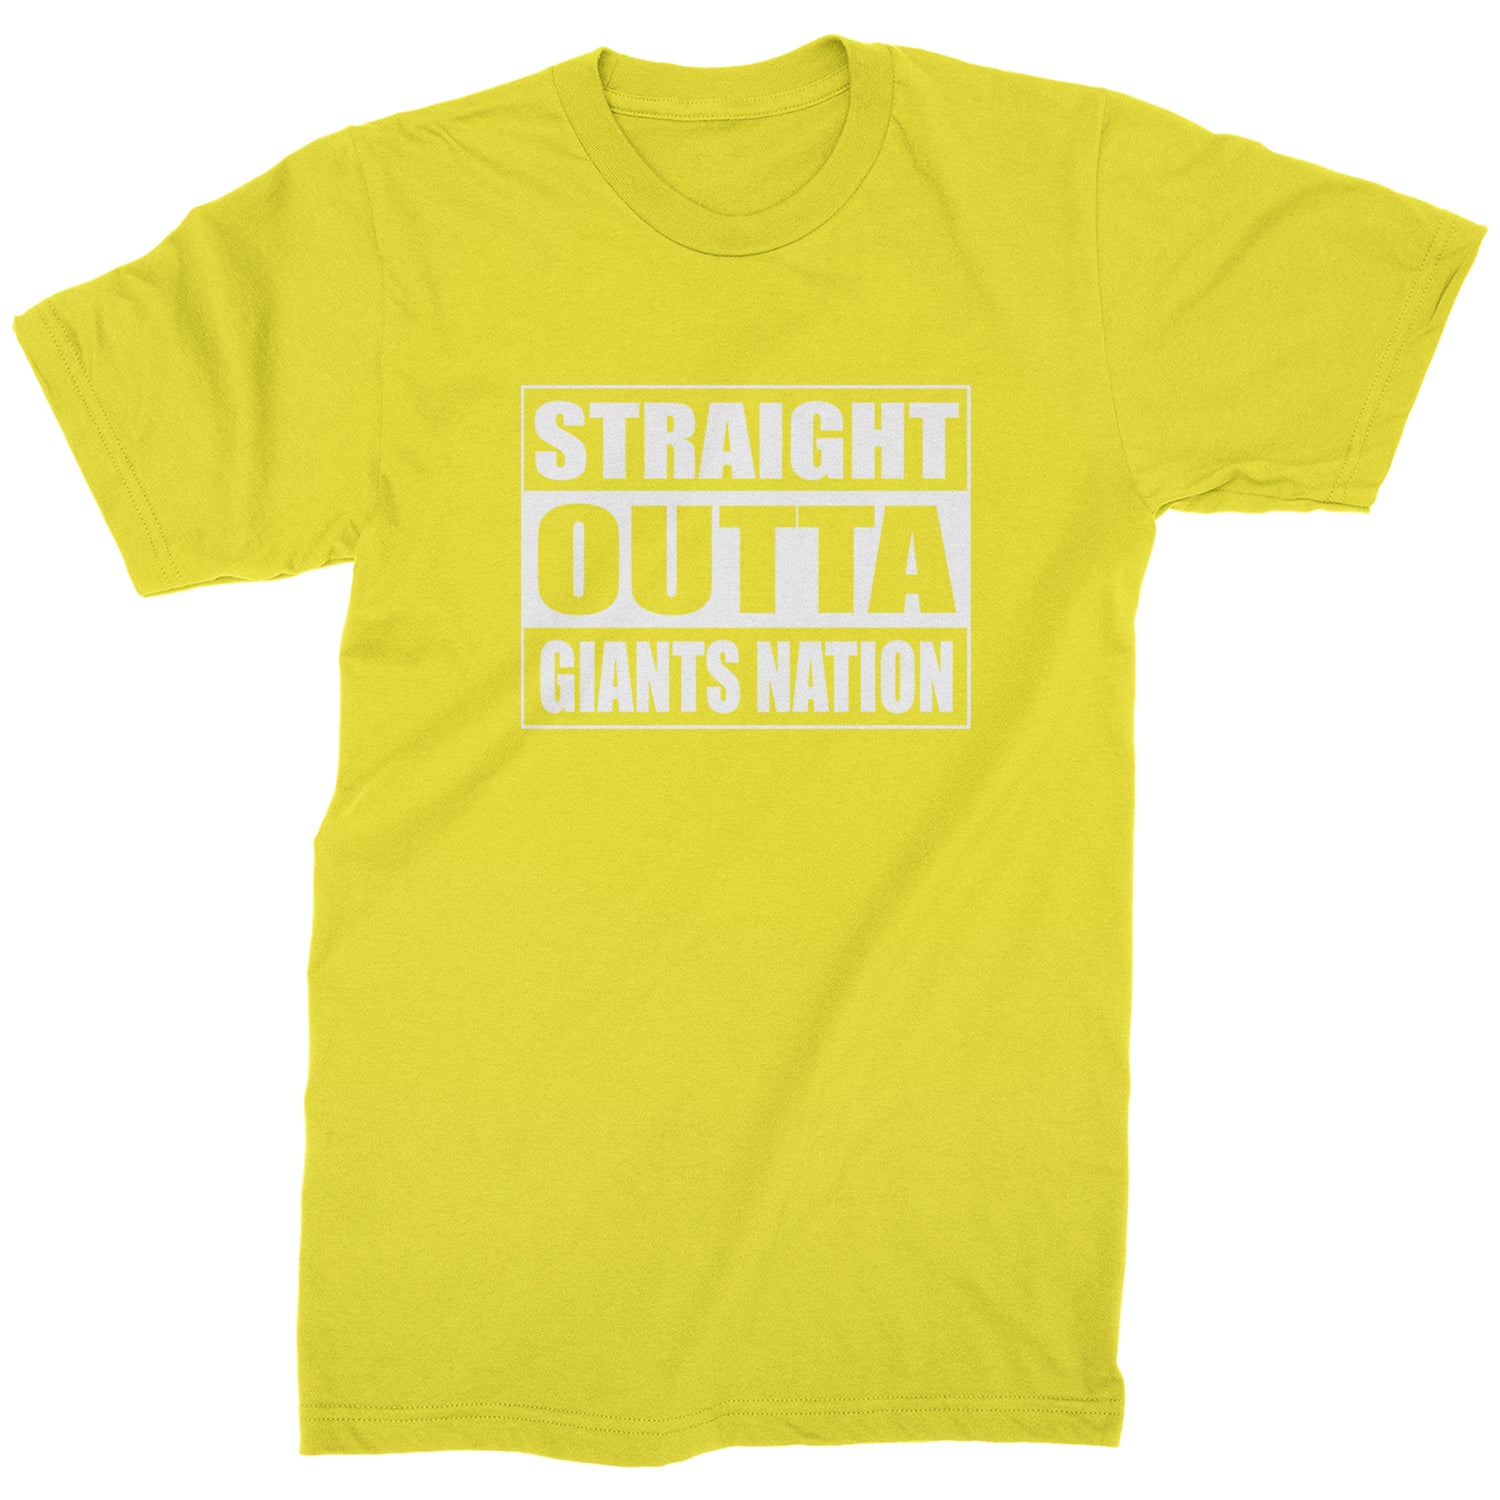 Straight Outta Giants Nation Mens T-shirt bleed, blue, football, giants, new, ny, york by Expression Tees